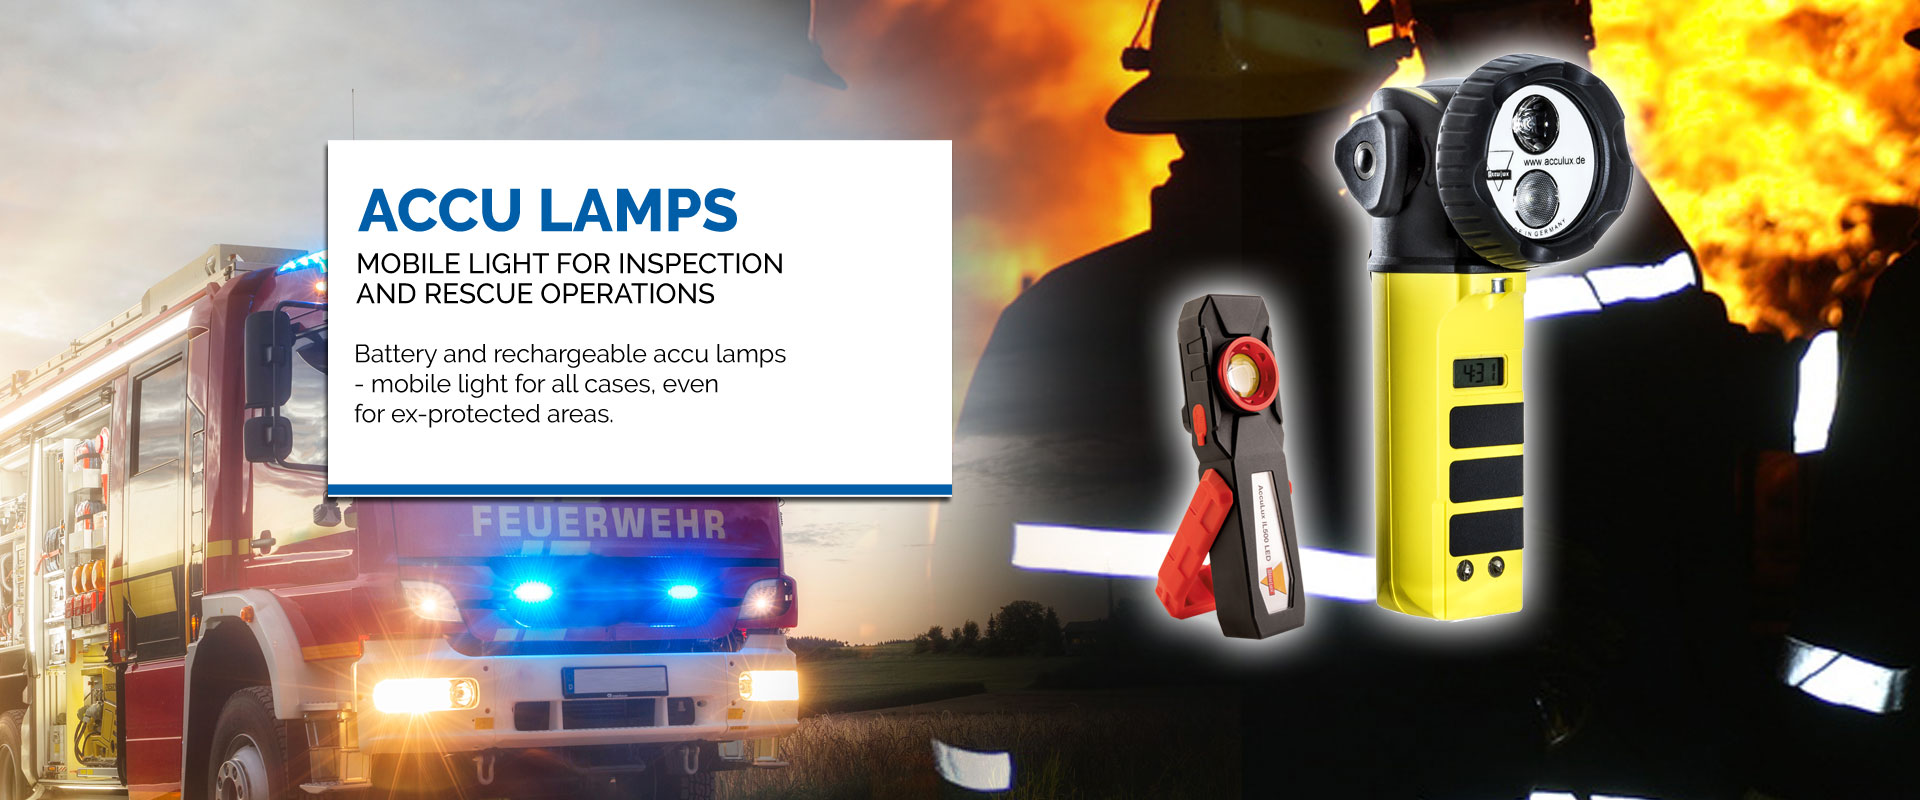 Battery-powered lights and hand lamps for rescue services